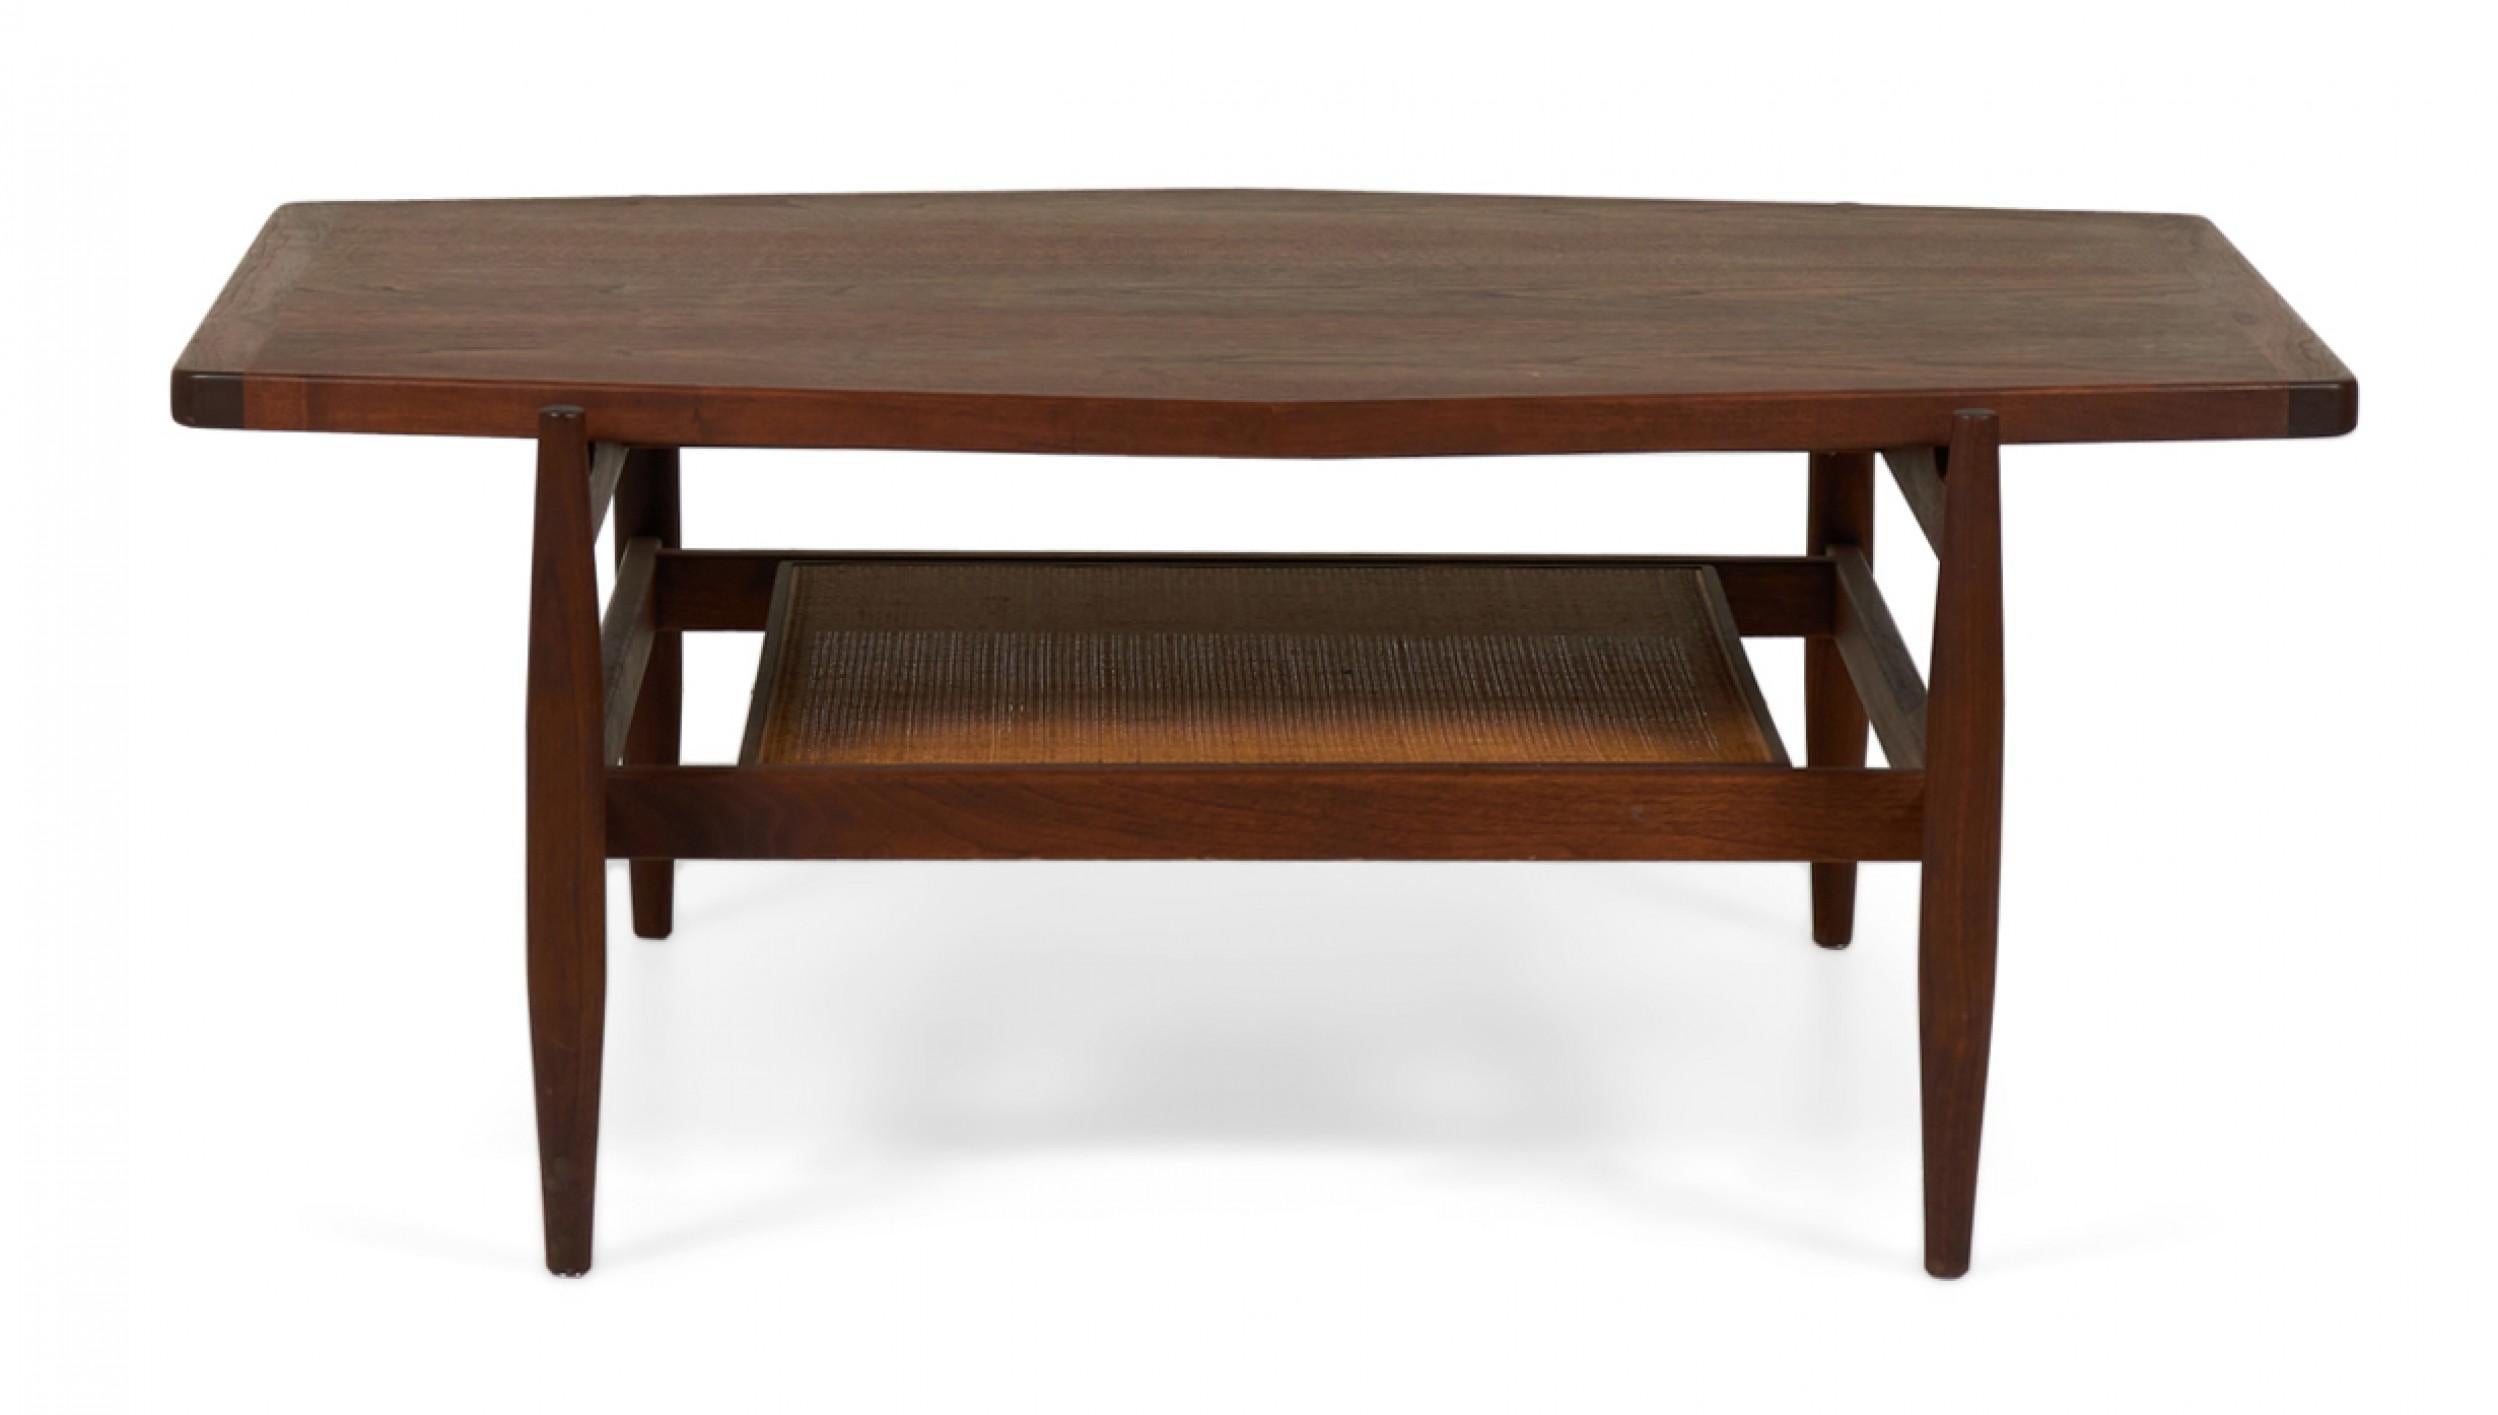 Jens Risom Mid-Century Diamond Top Walnut and Caning Coffee Table For Sale 1